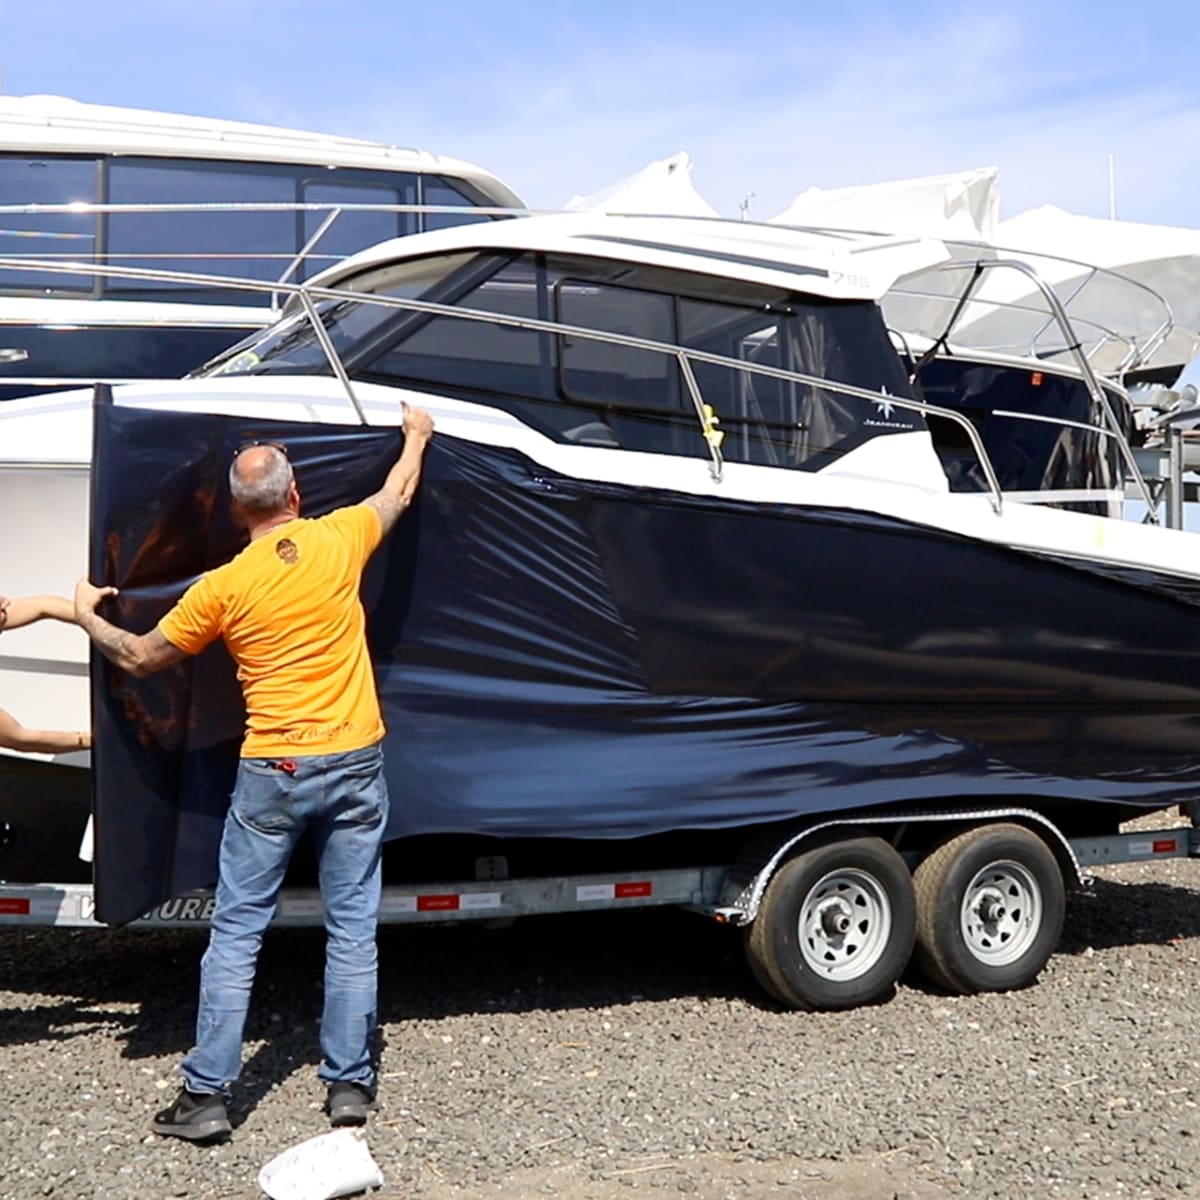 All About Vinyl Wrapping Your Boat - Power & Motoryacht